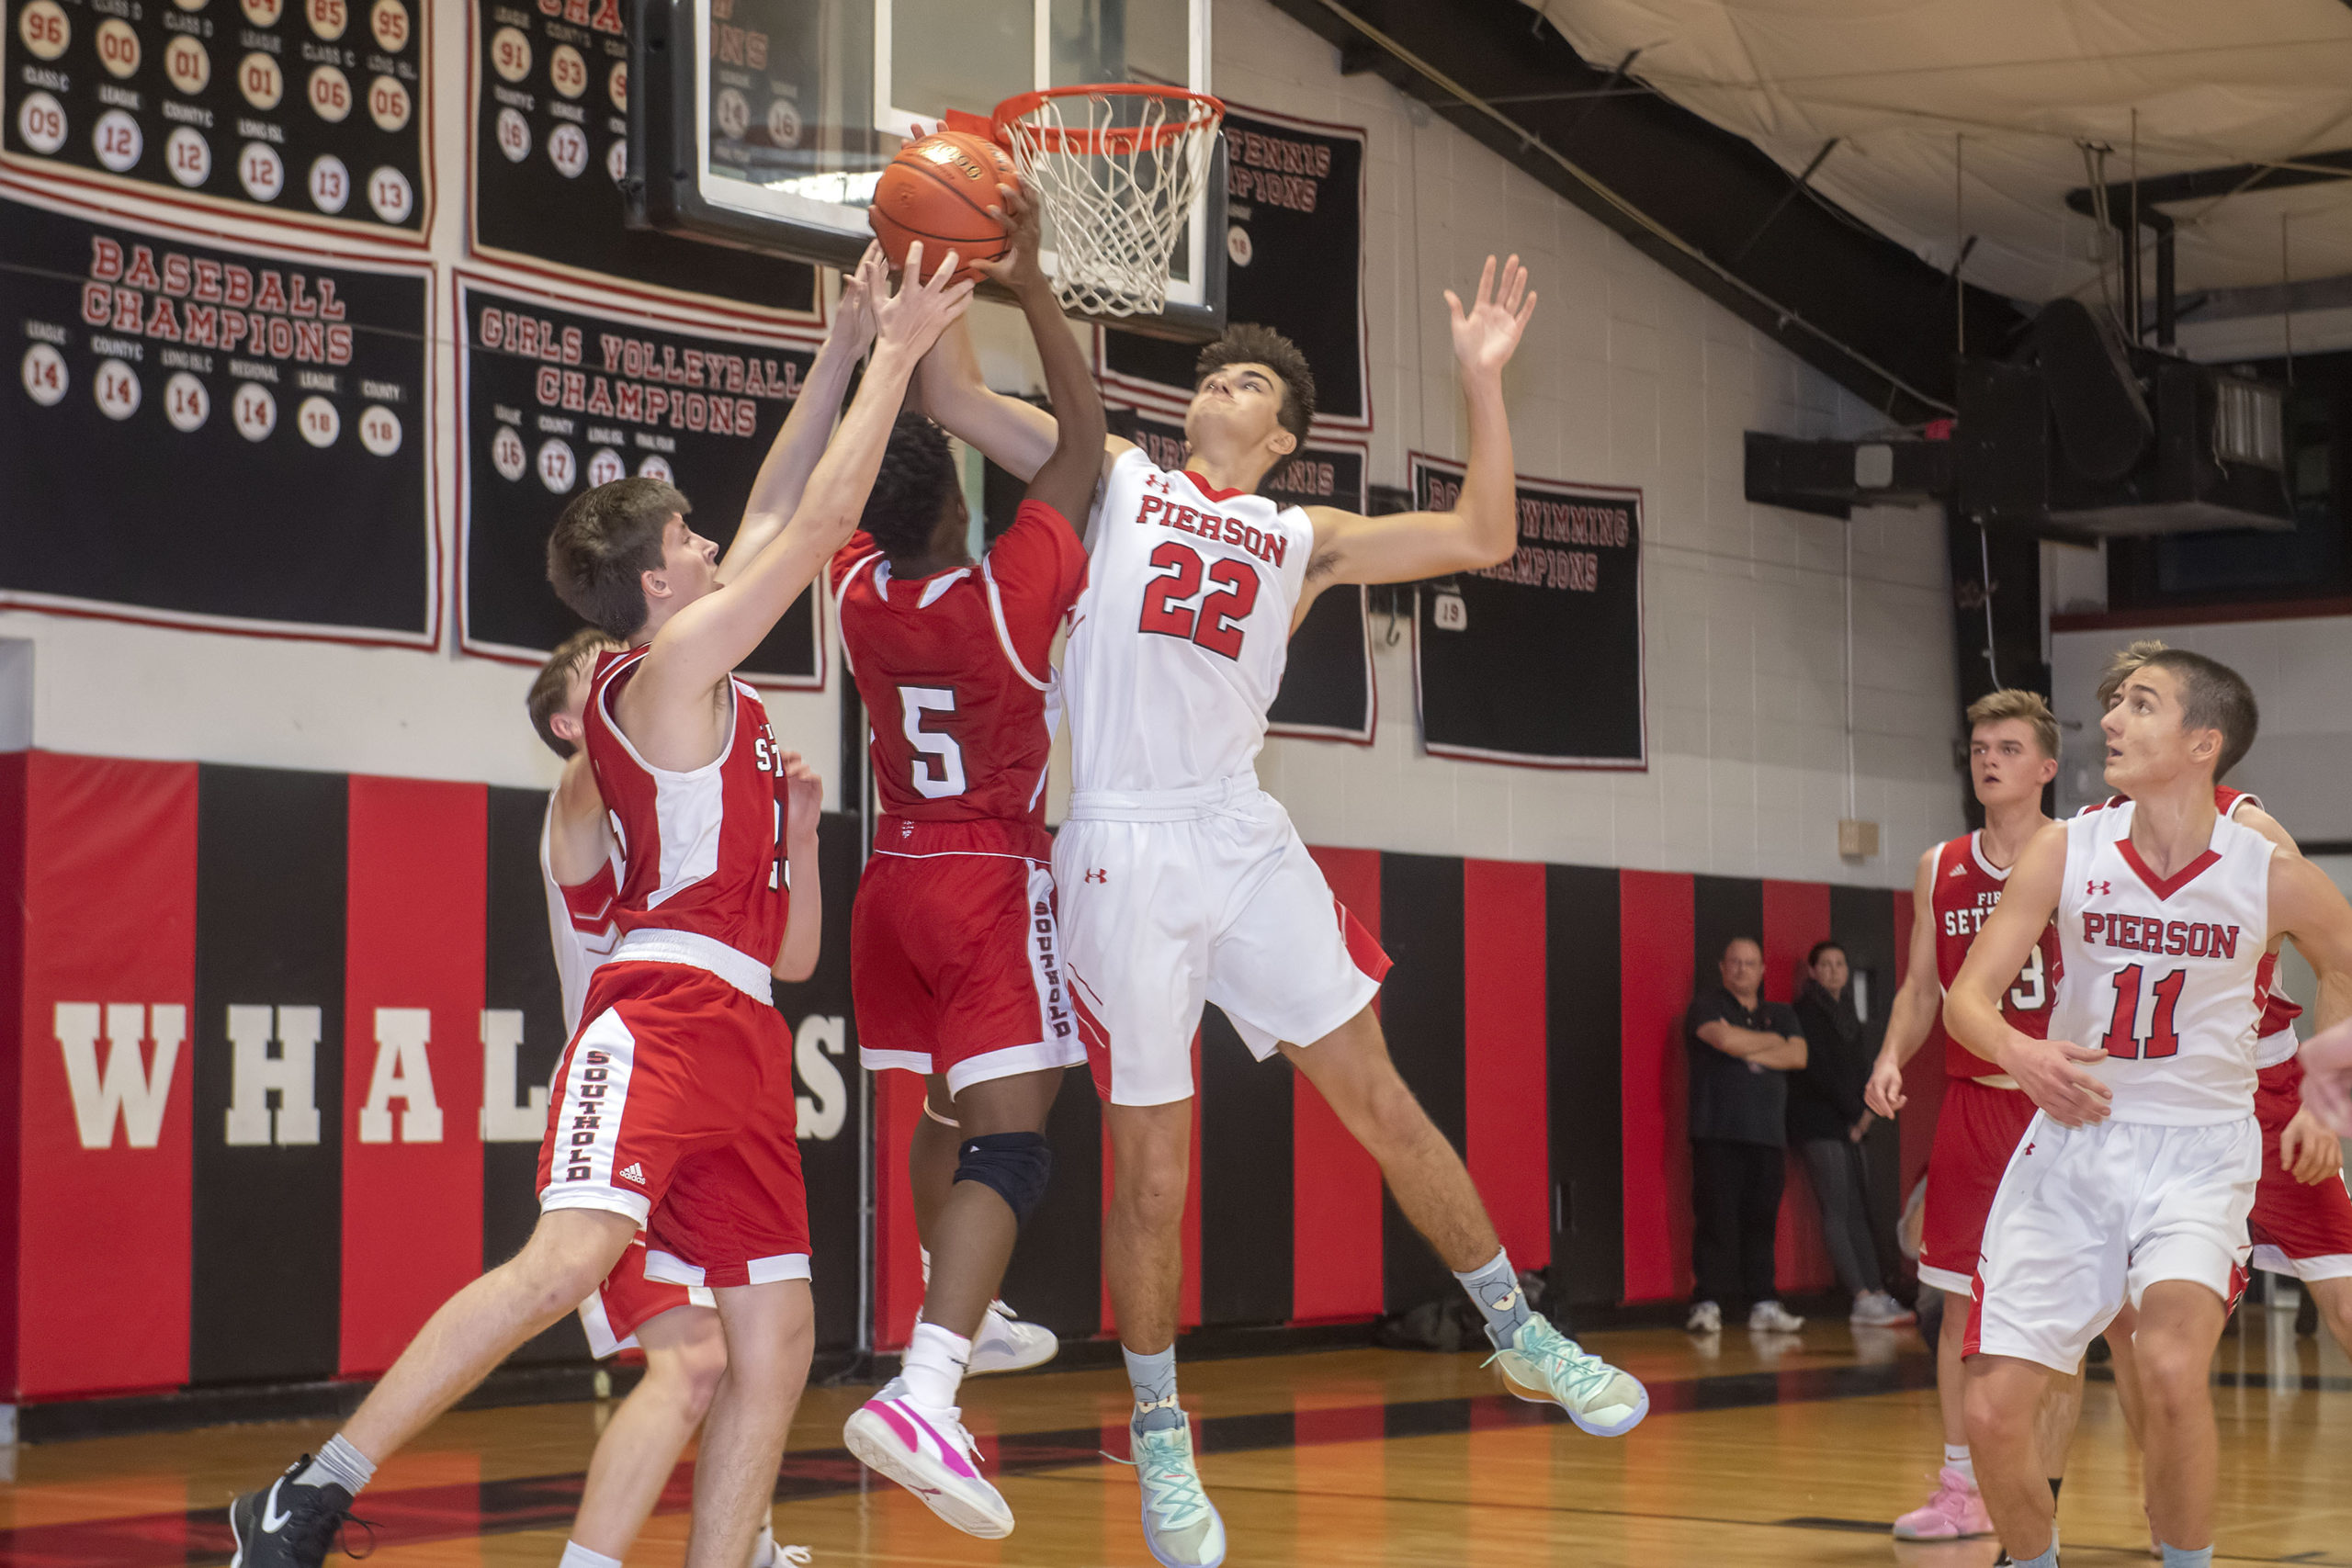 Pierson's Harry Cowen denies a Southold player at the hoop.